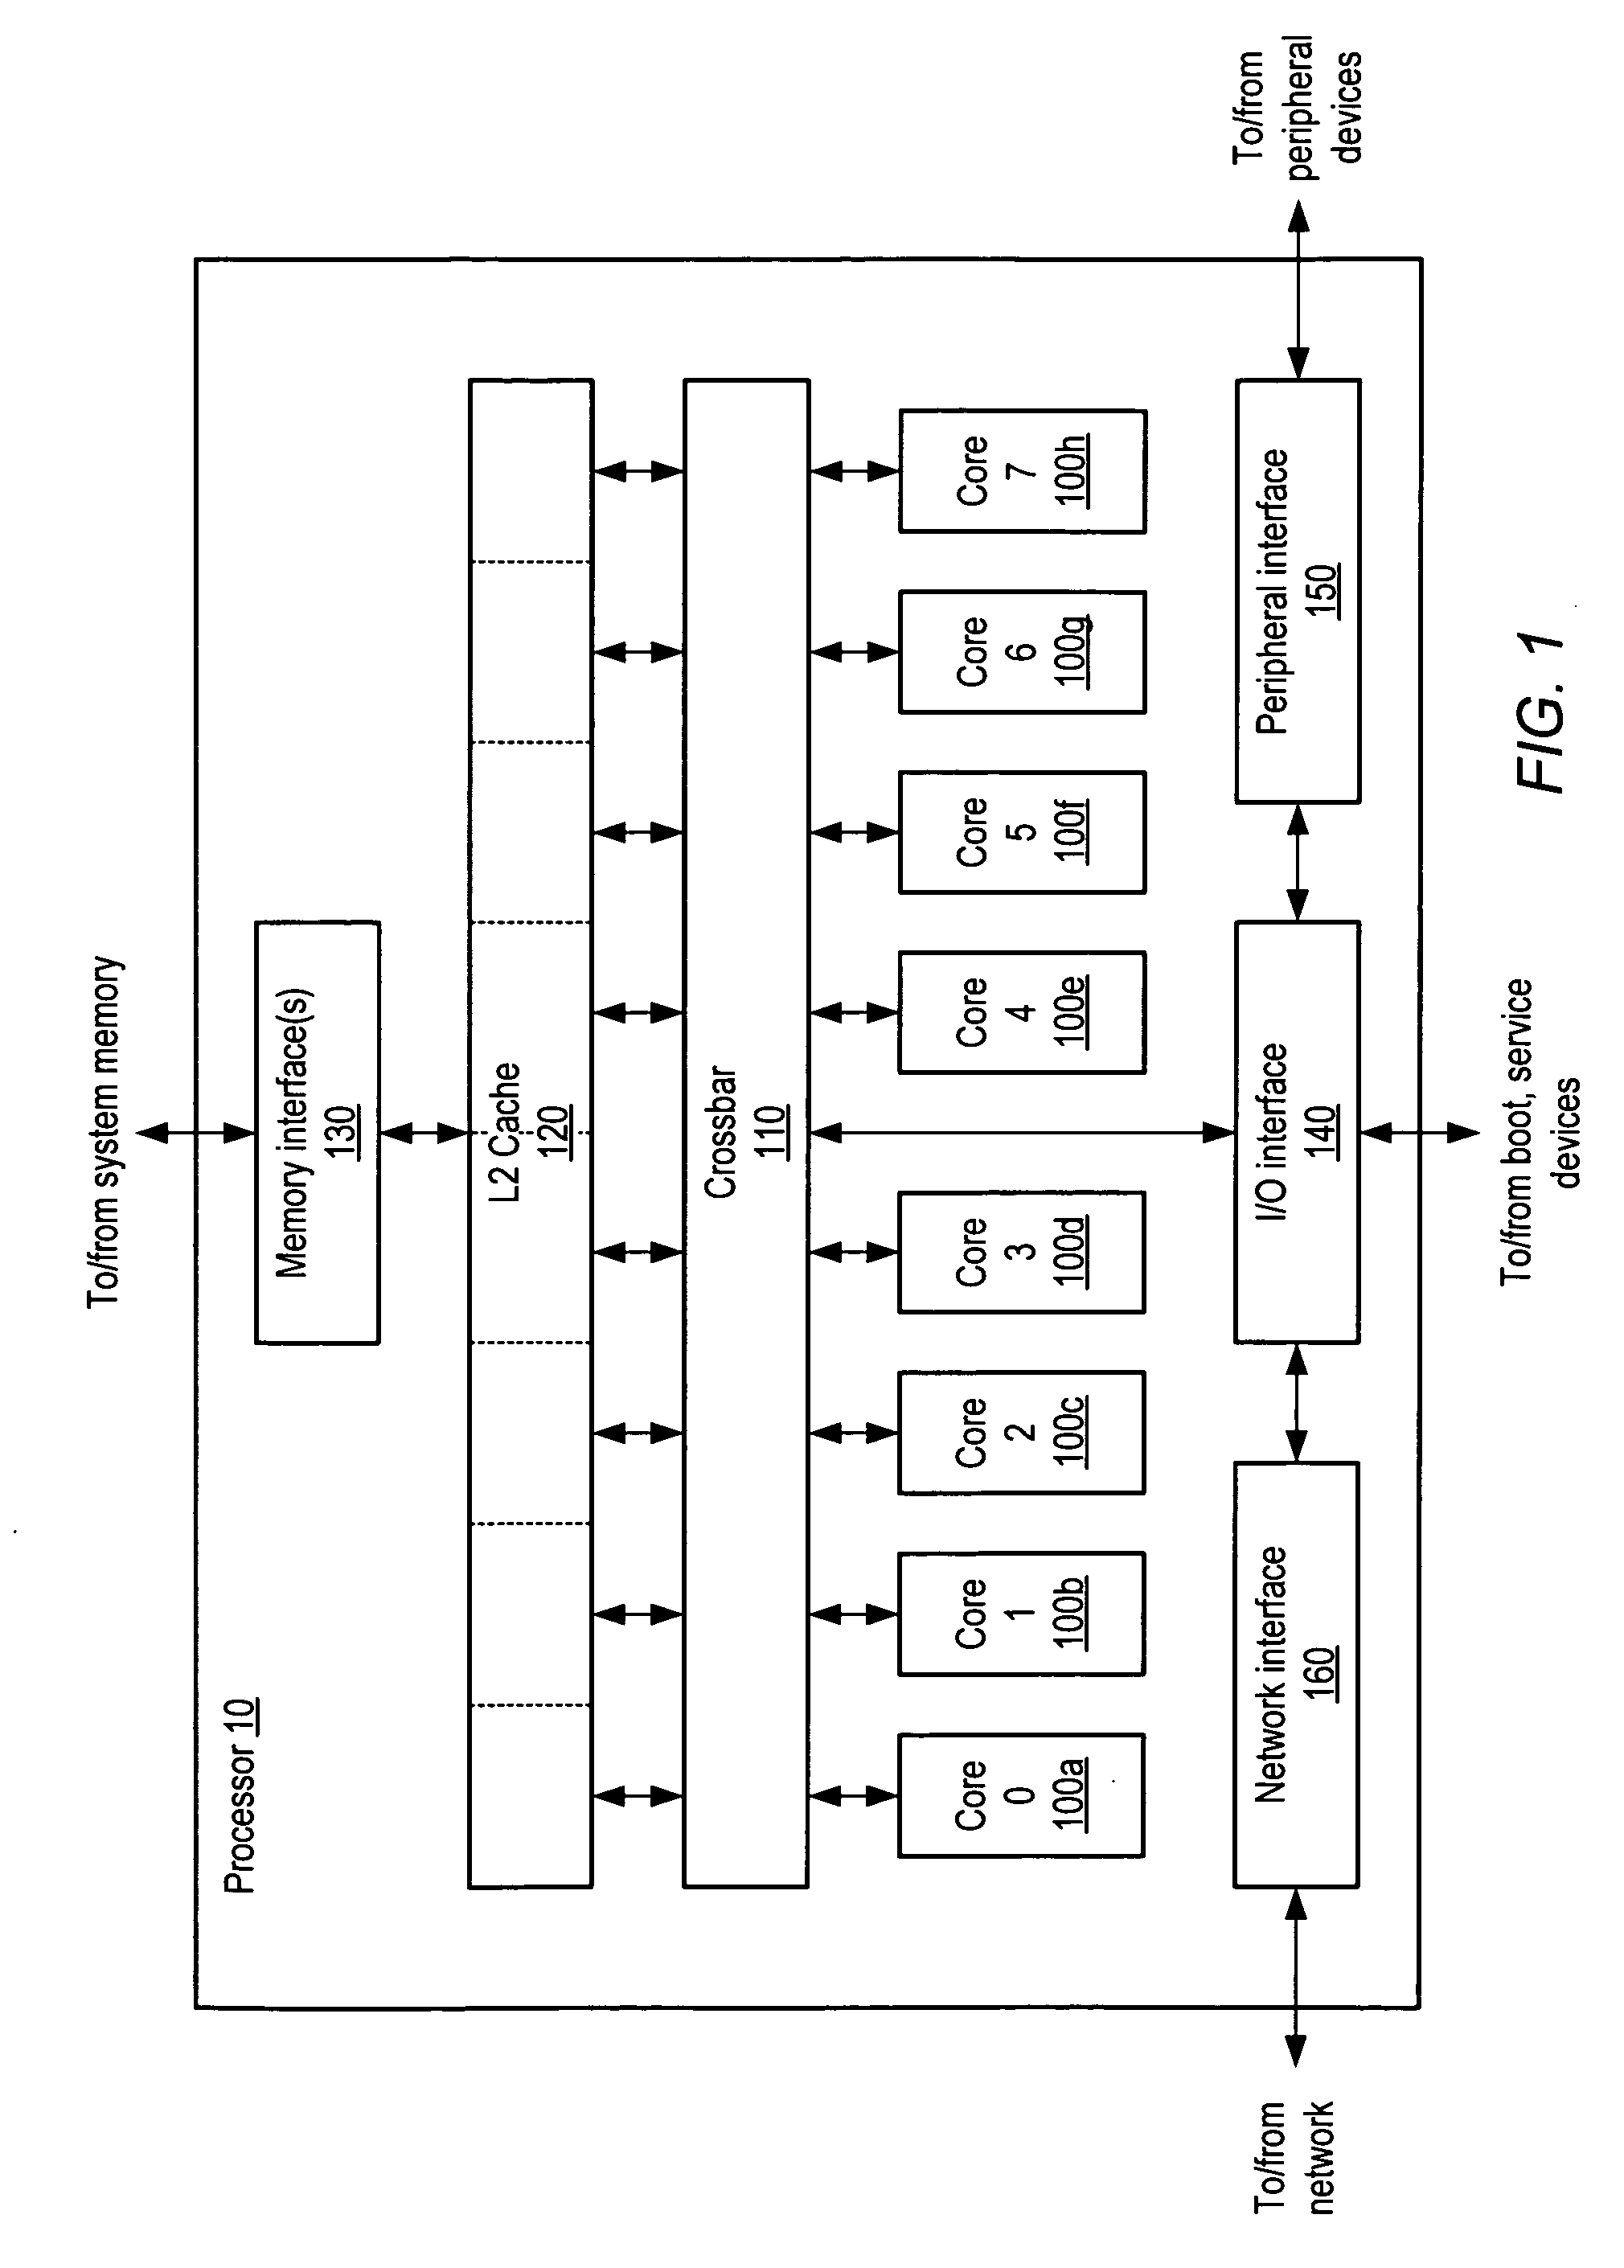 Method and system for trace generation using memory index hashing